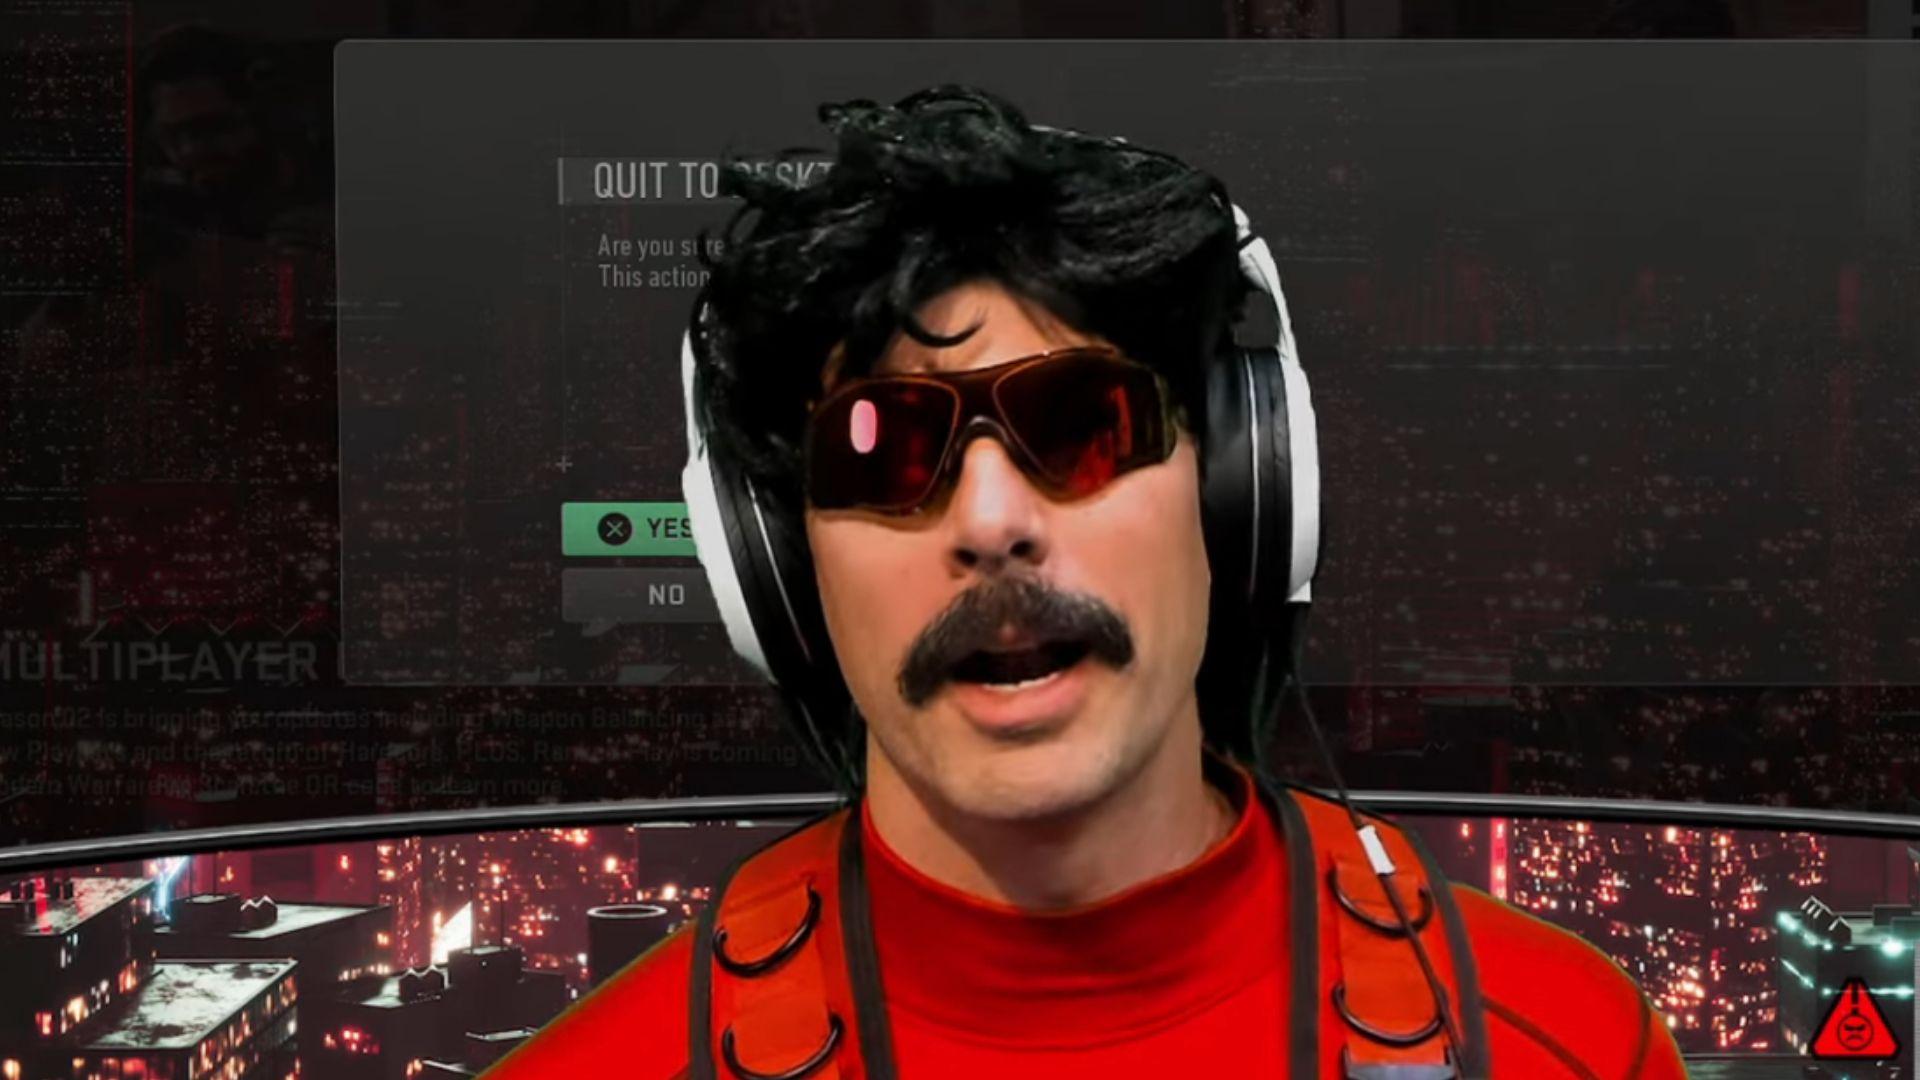 Dr Disrespect looking fed up at camera with mouth open